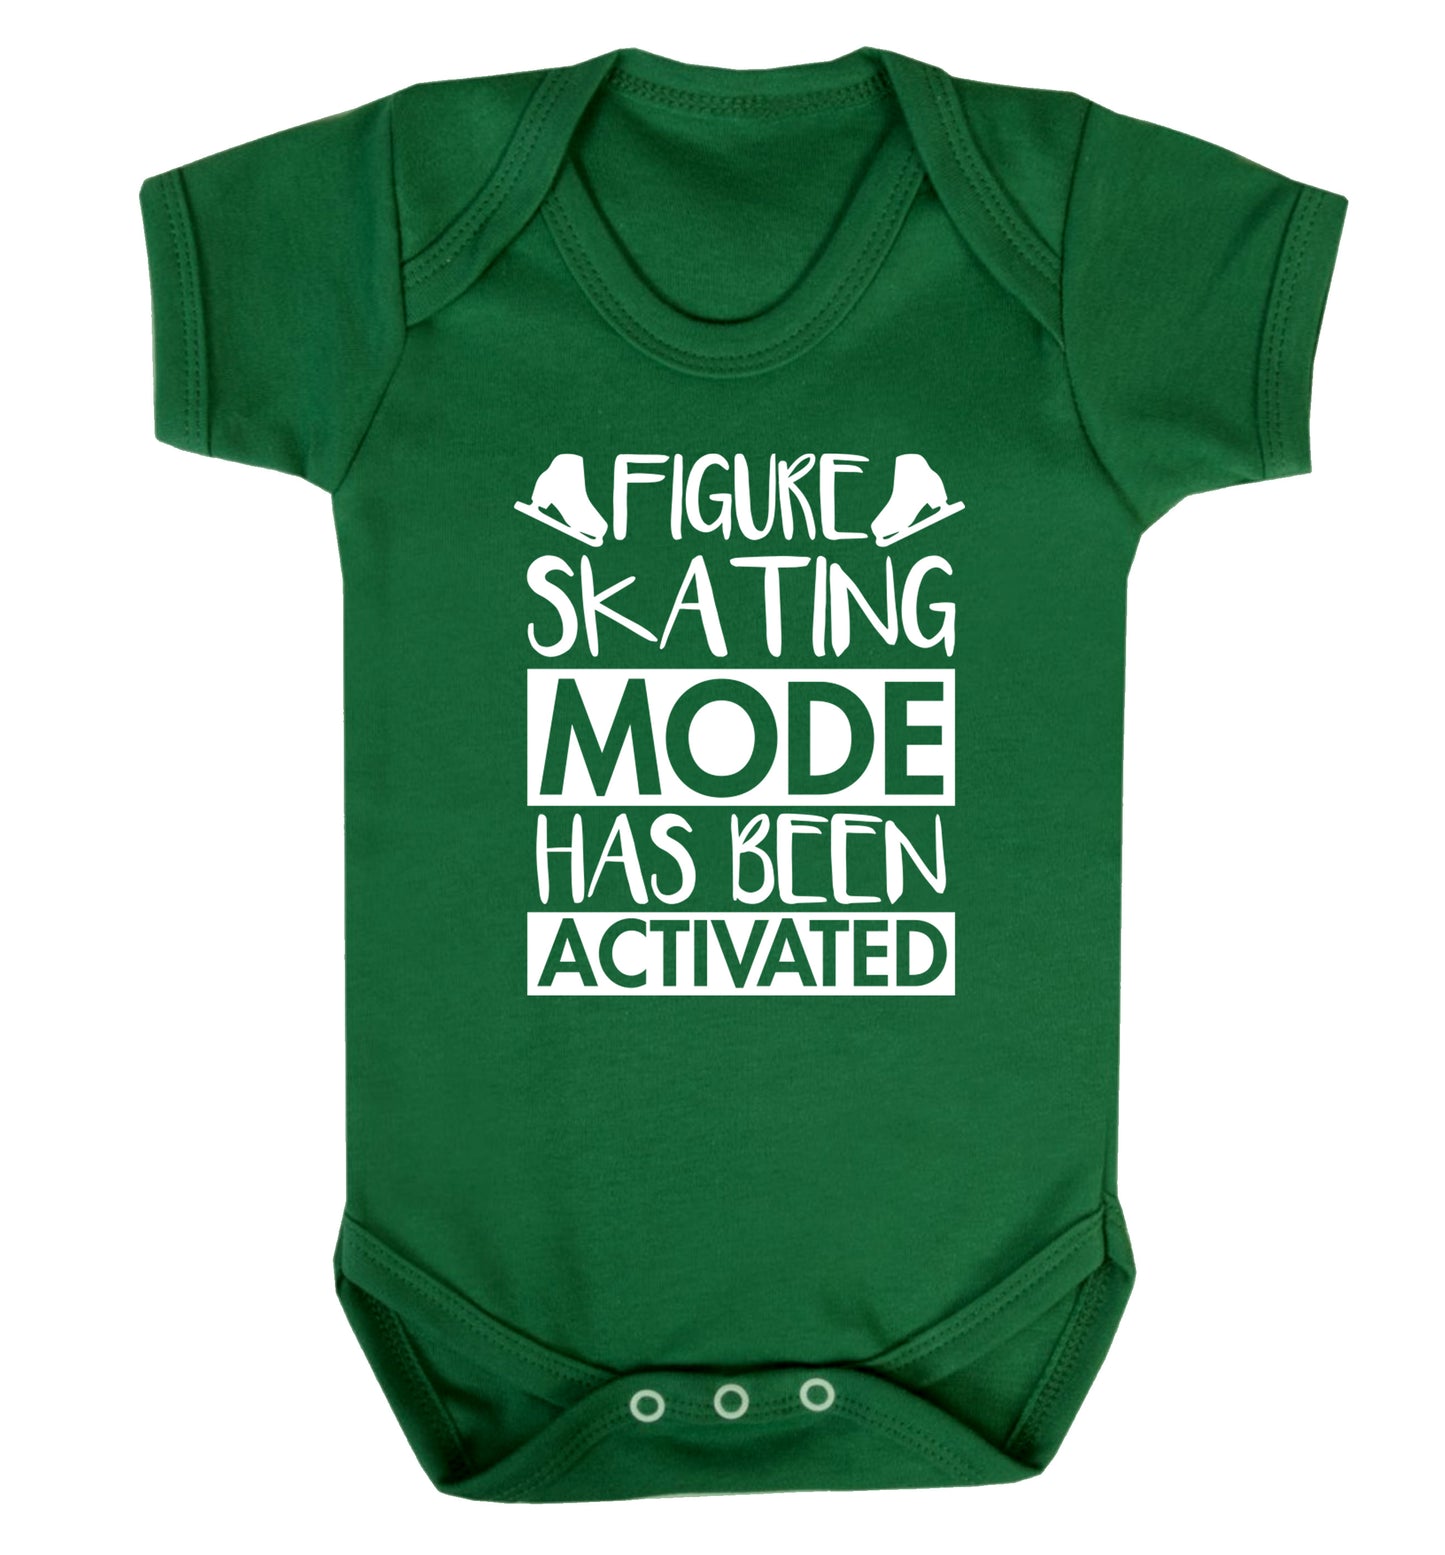 Figure skating mode activated Baby Vest green 18-24 months